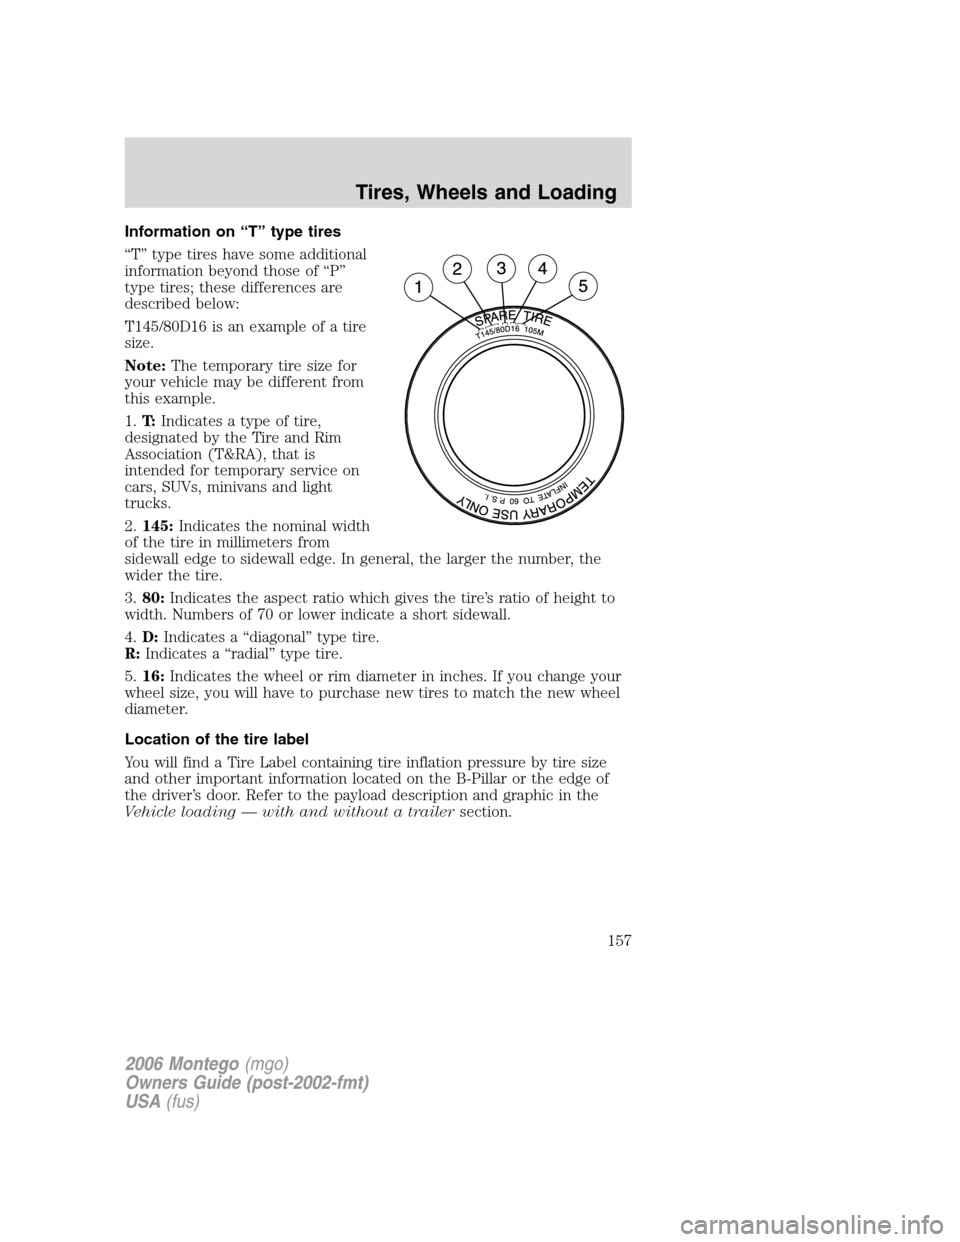 Mercury Montego 2006  Owners Manuals Information on “T” type tires
“T” type tires have some additional
information beyond those of “P”
type tires; these differences are
described below:
T145/80D16 is an example of a tire
size